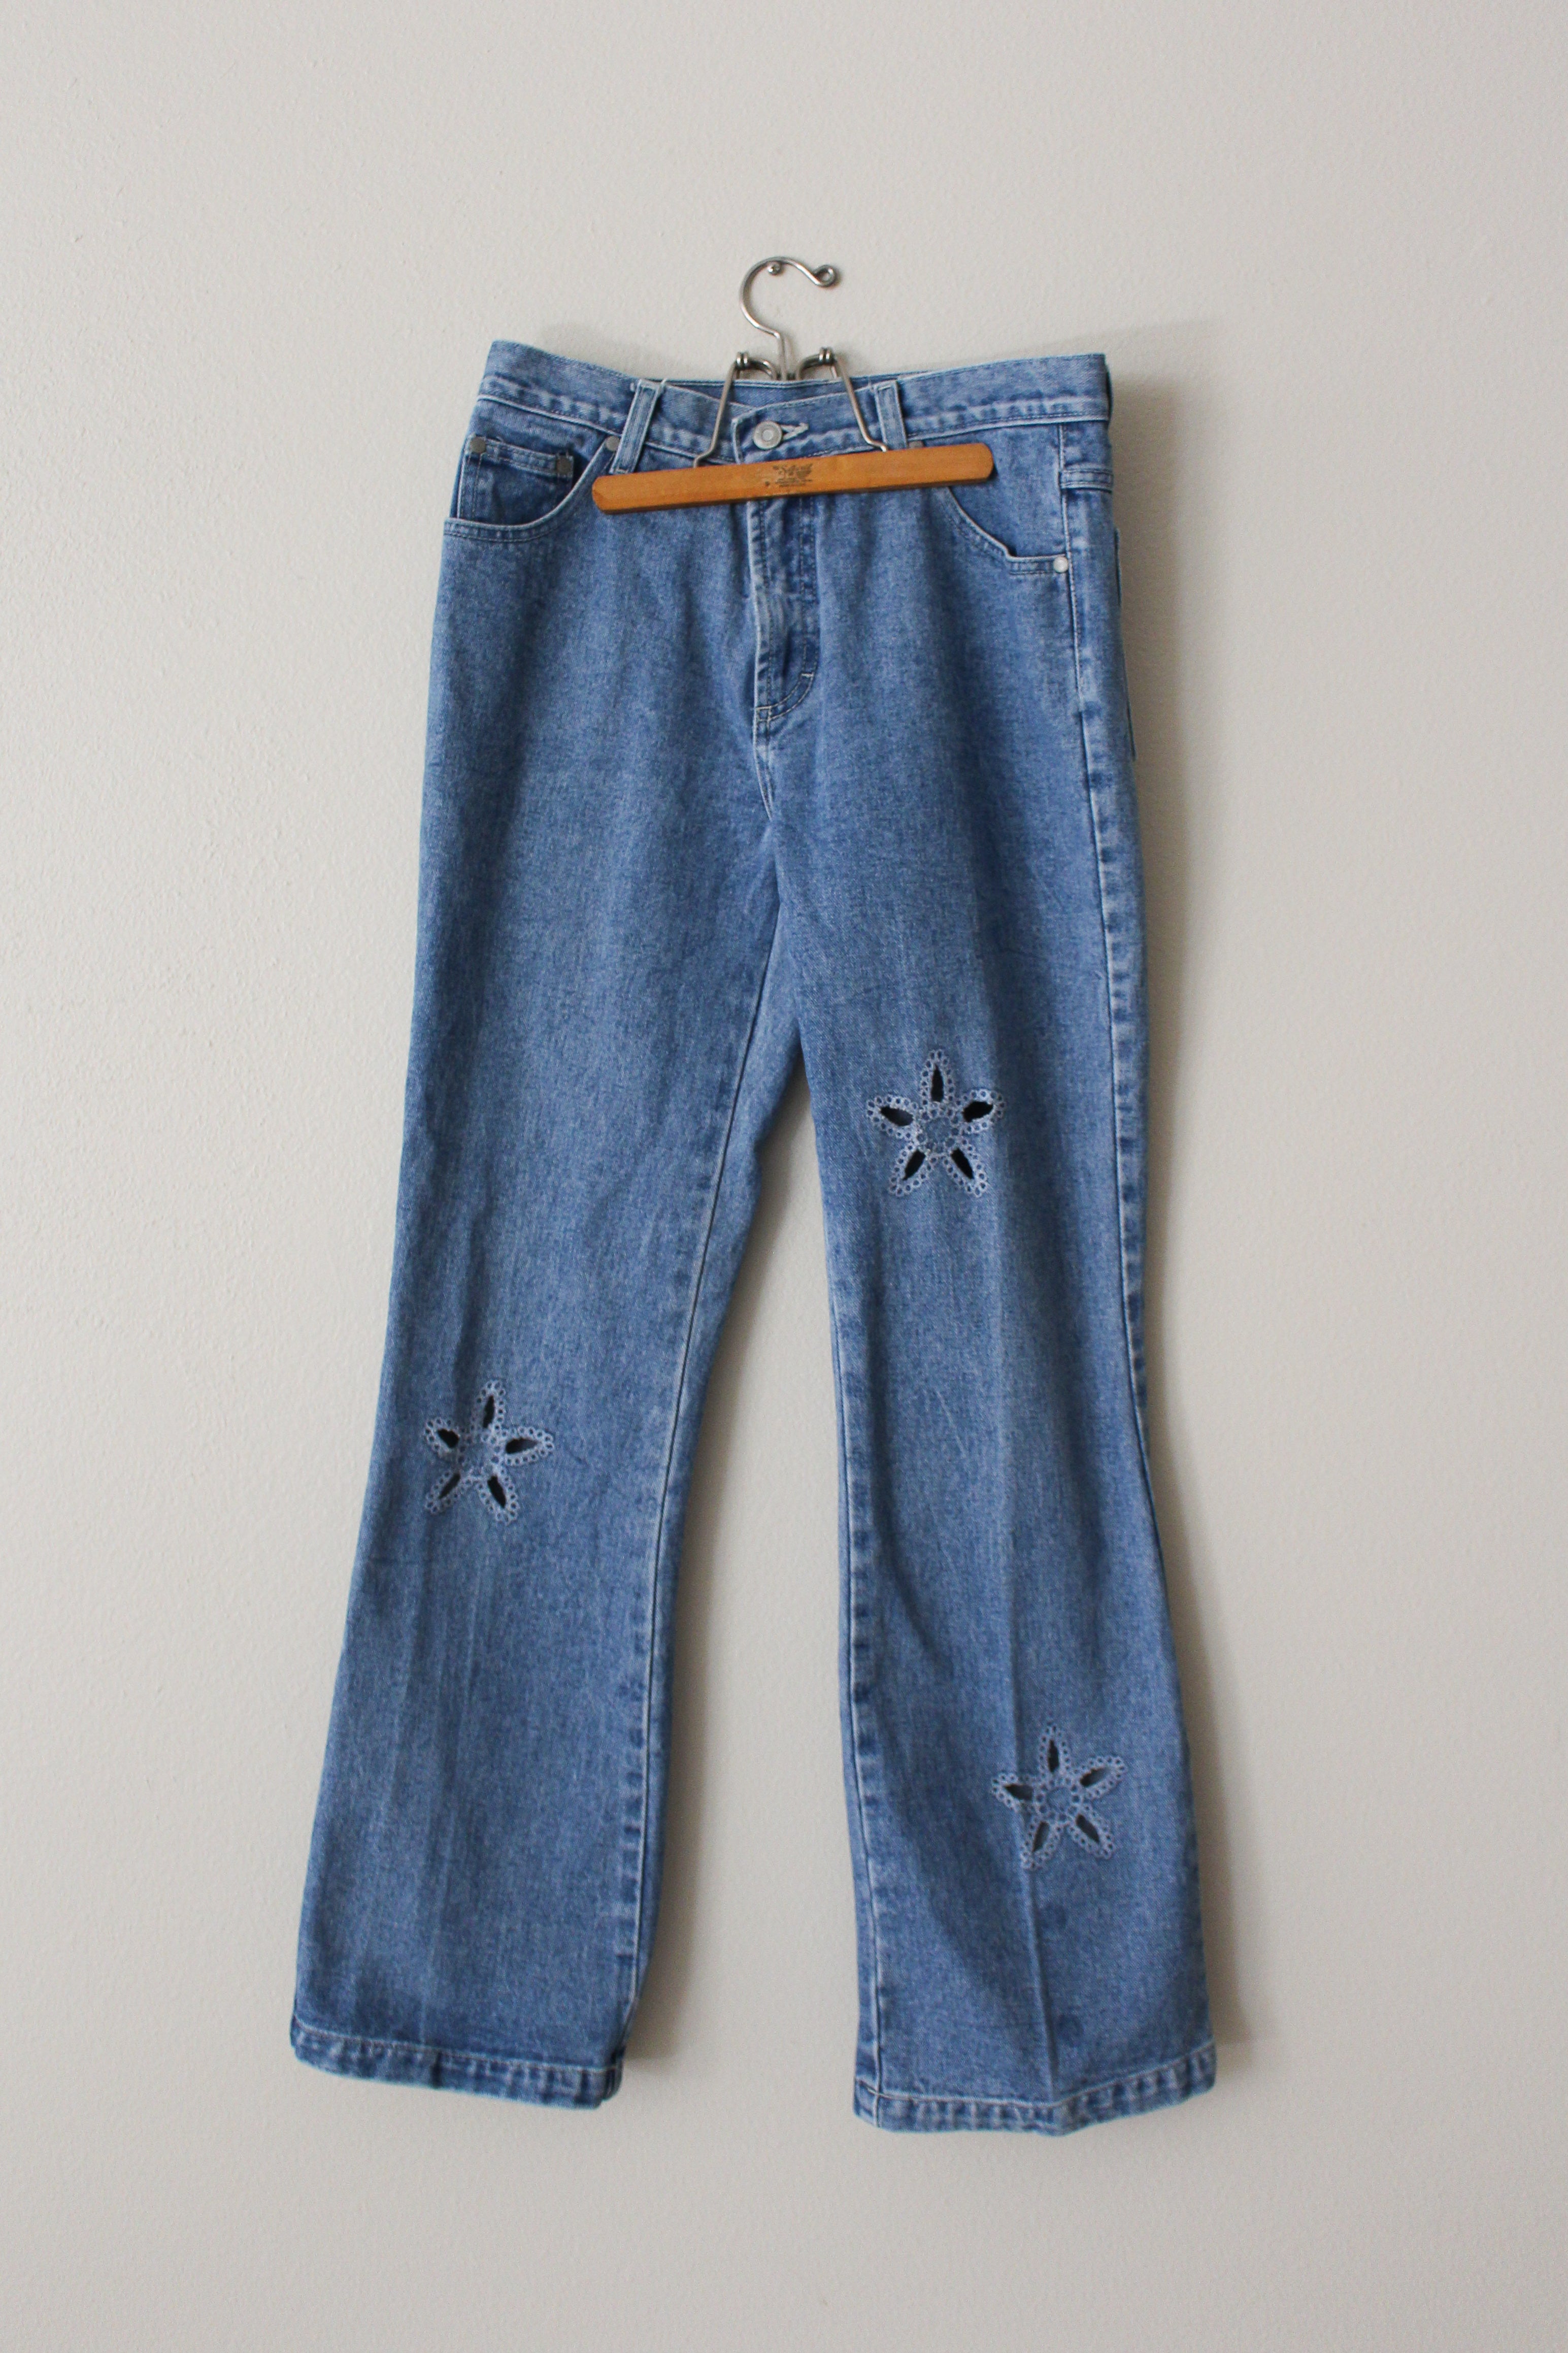 Y2k Floral Embroidery Flare Pants